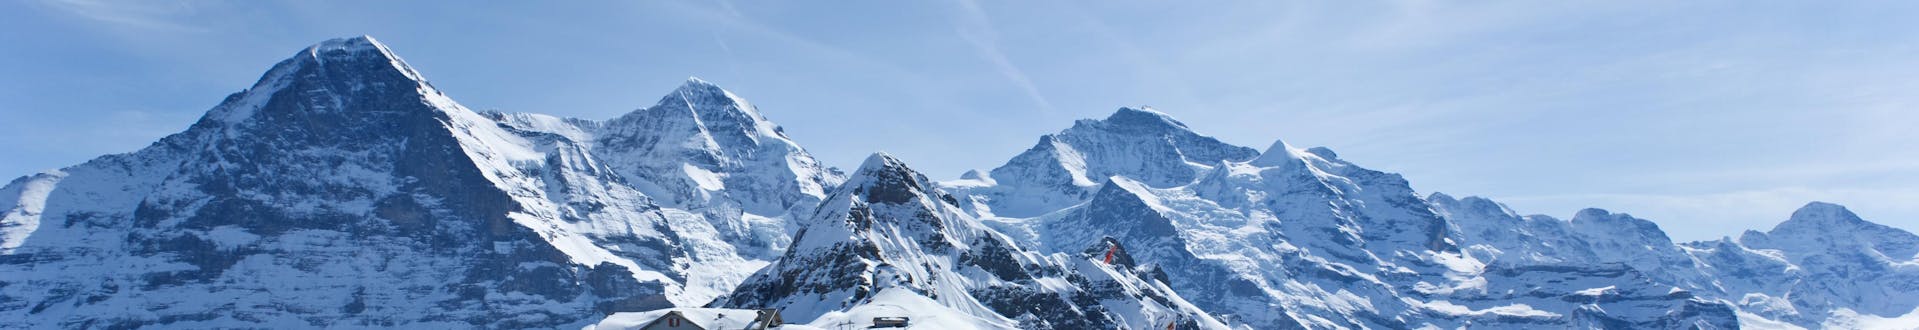 View of the snowy mountain landscape surrounding the mountain station of the cable car in the swiss ski resort of Interlaken.